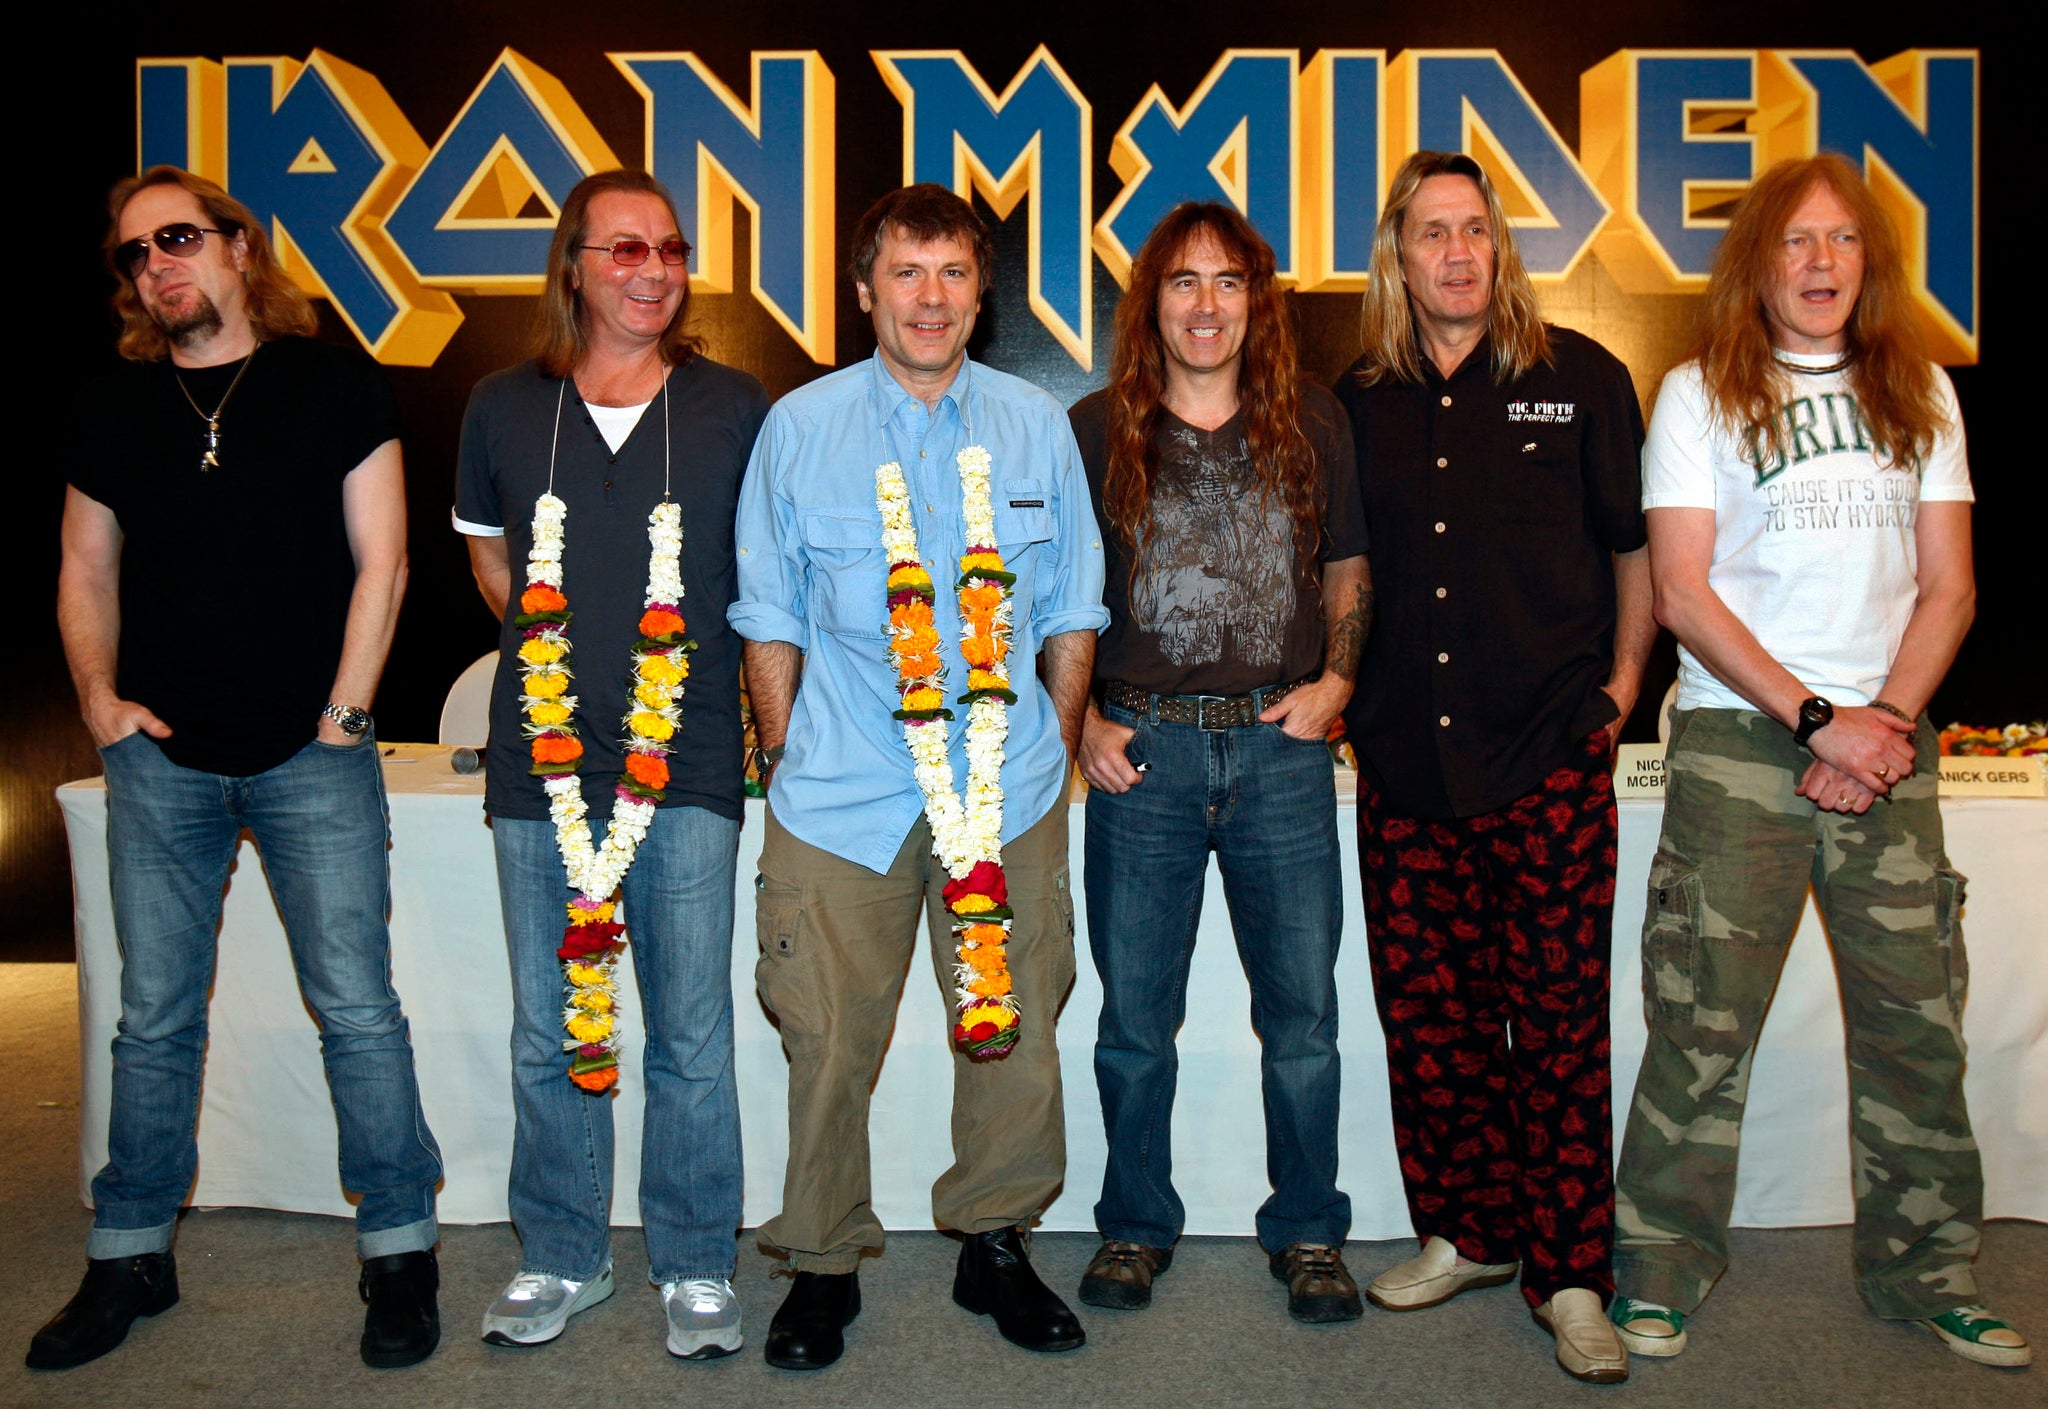 L-R Adrian Smith, Dave Murray, Bruce Dickinson, Steve Harris, Nicko McBrain and Janick Gers of Iron Maiden